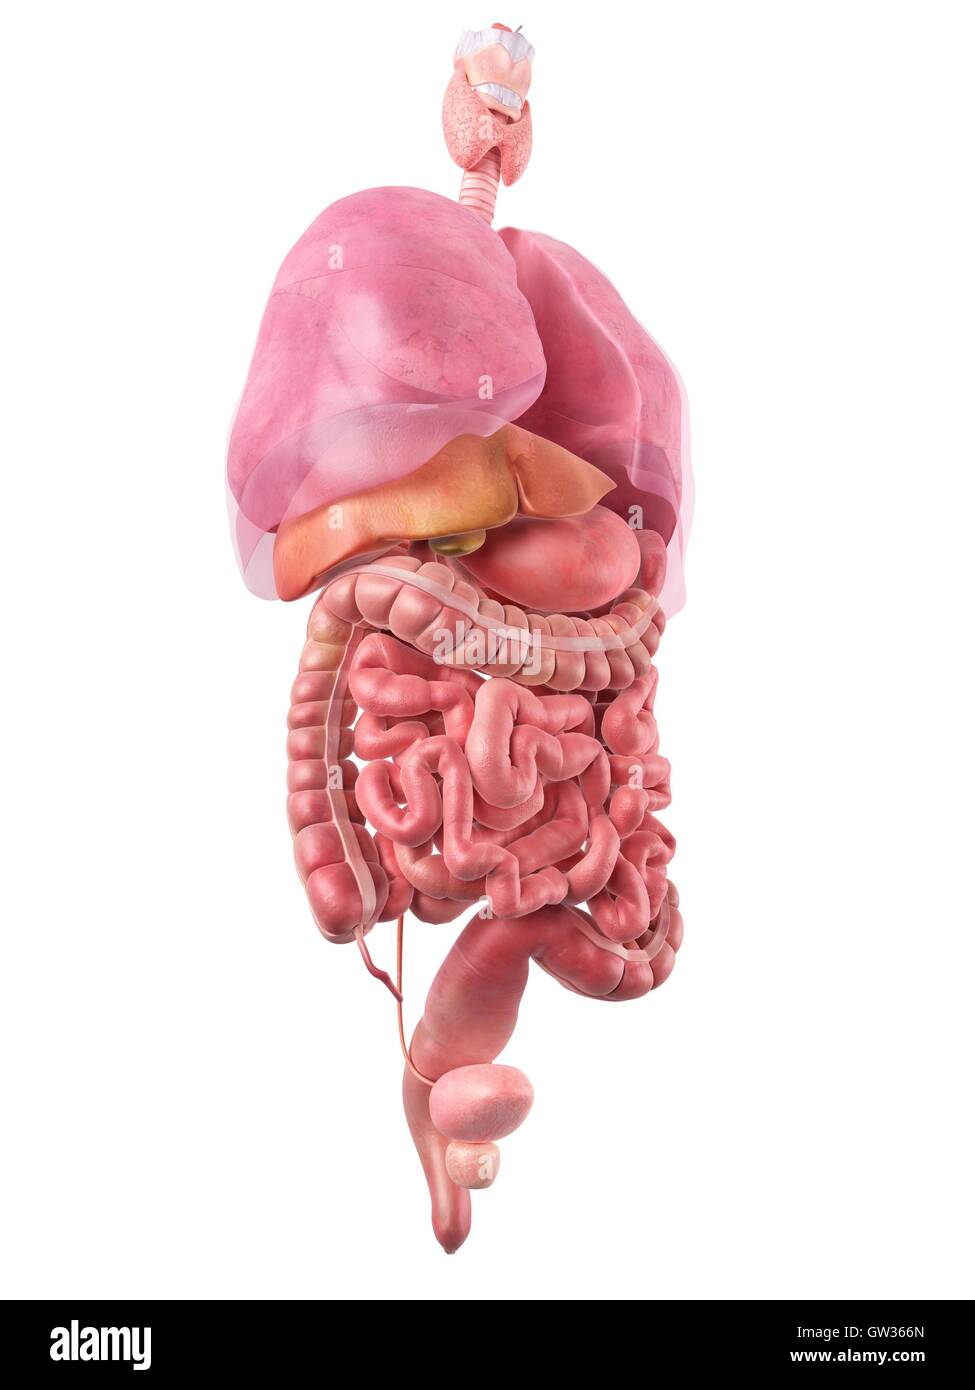 Internal organs Cut Out Stock Images & Pictures - Alamy